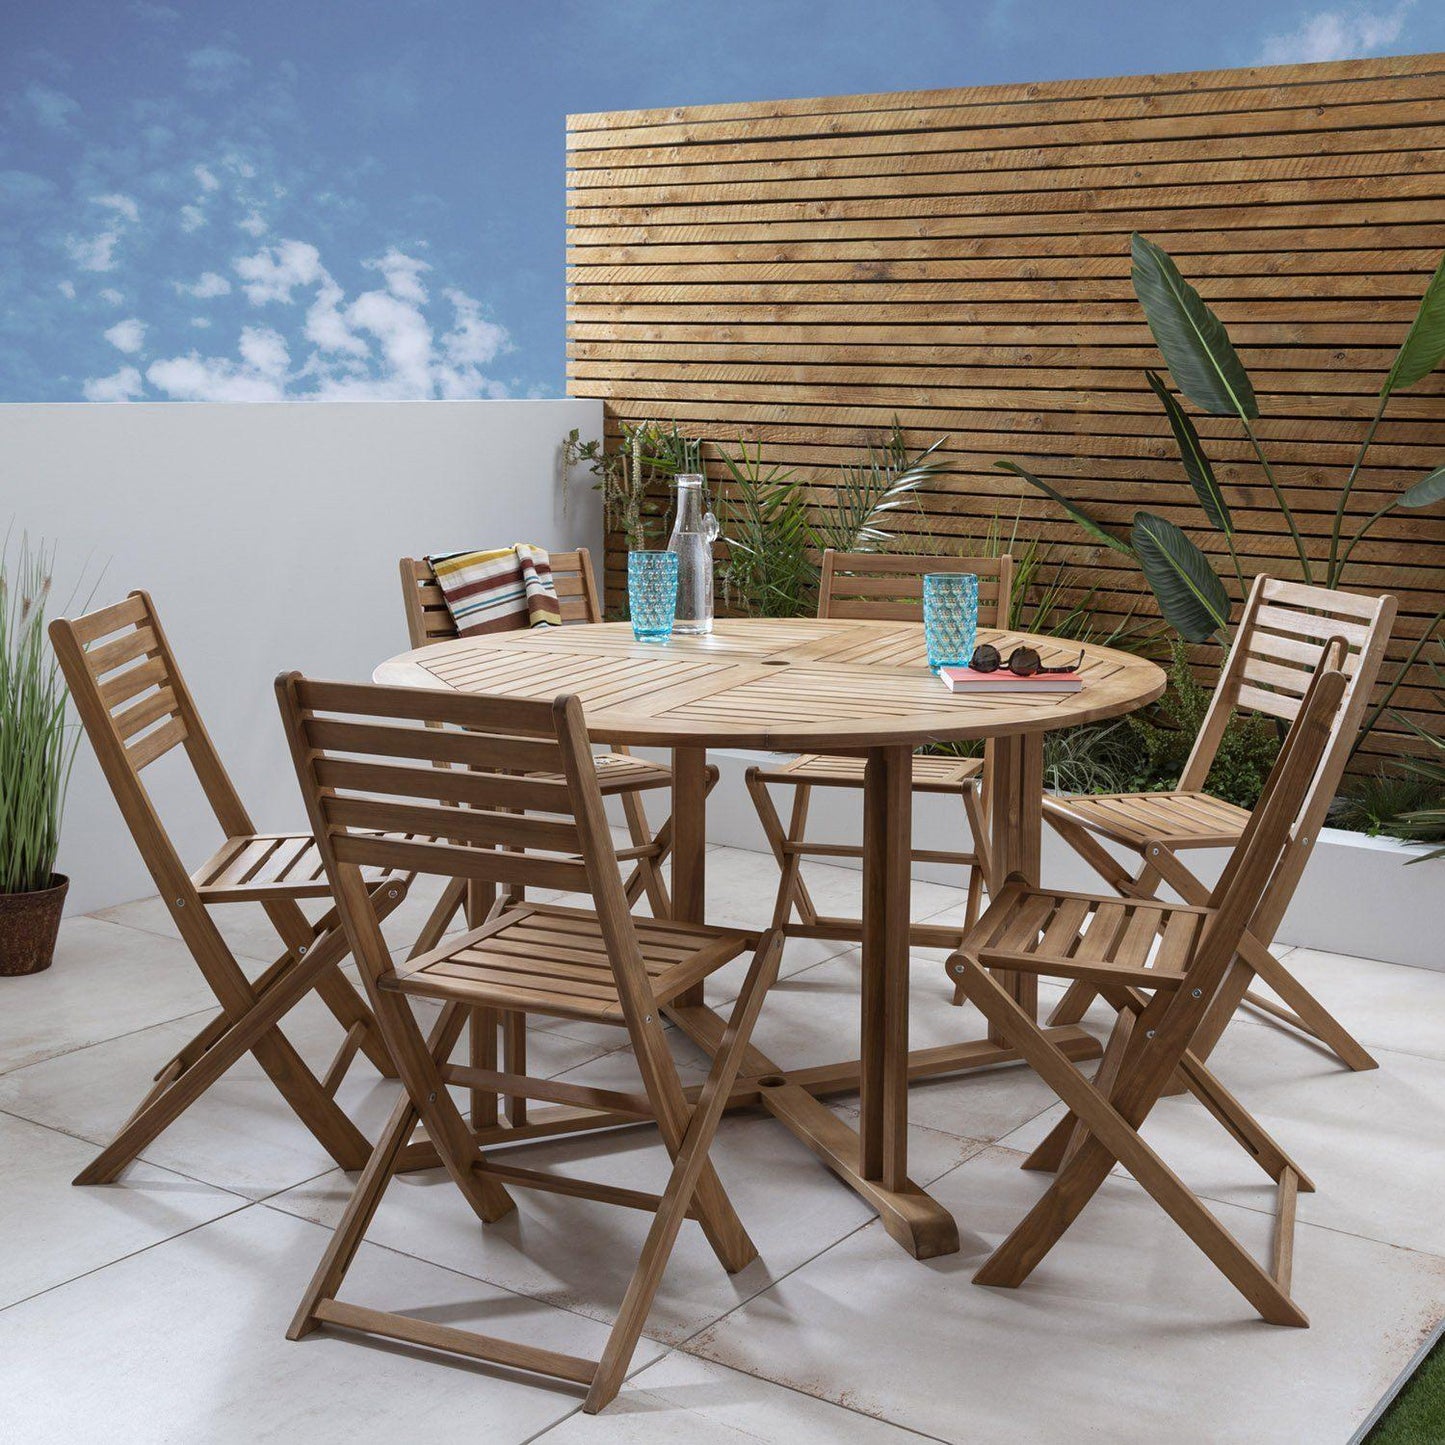 Casey wooden garden furniture - 6 seater outdoor dining set with cream parasol - Laura James